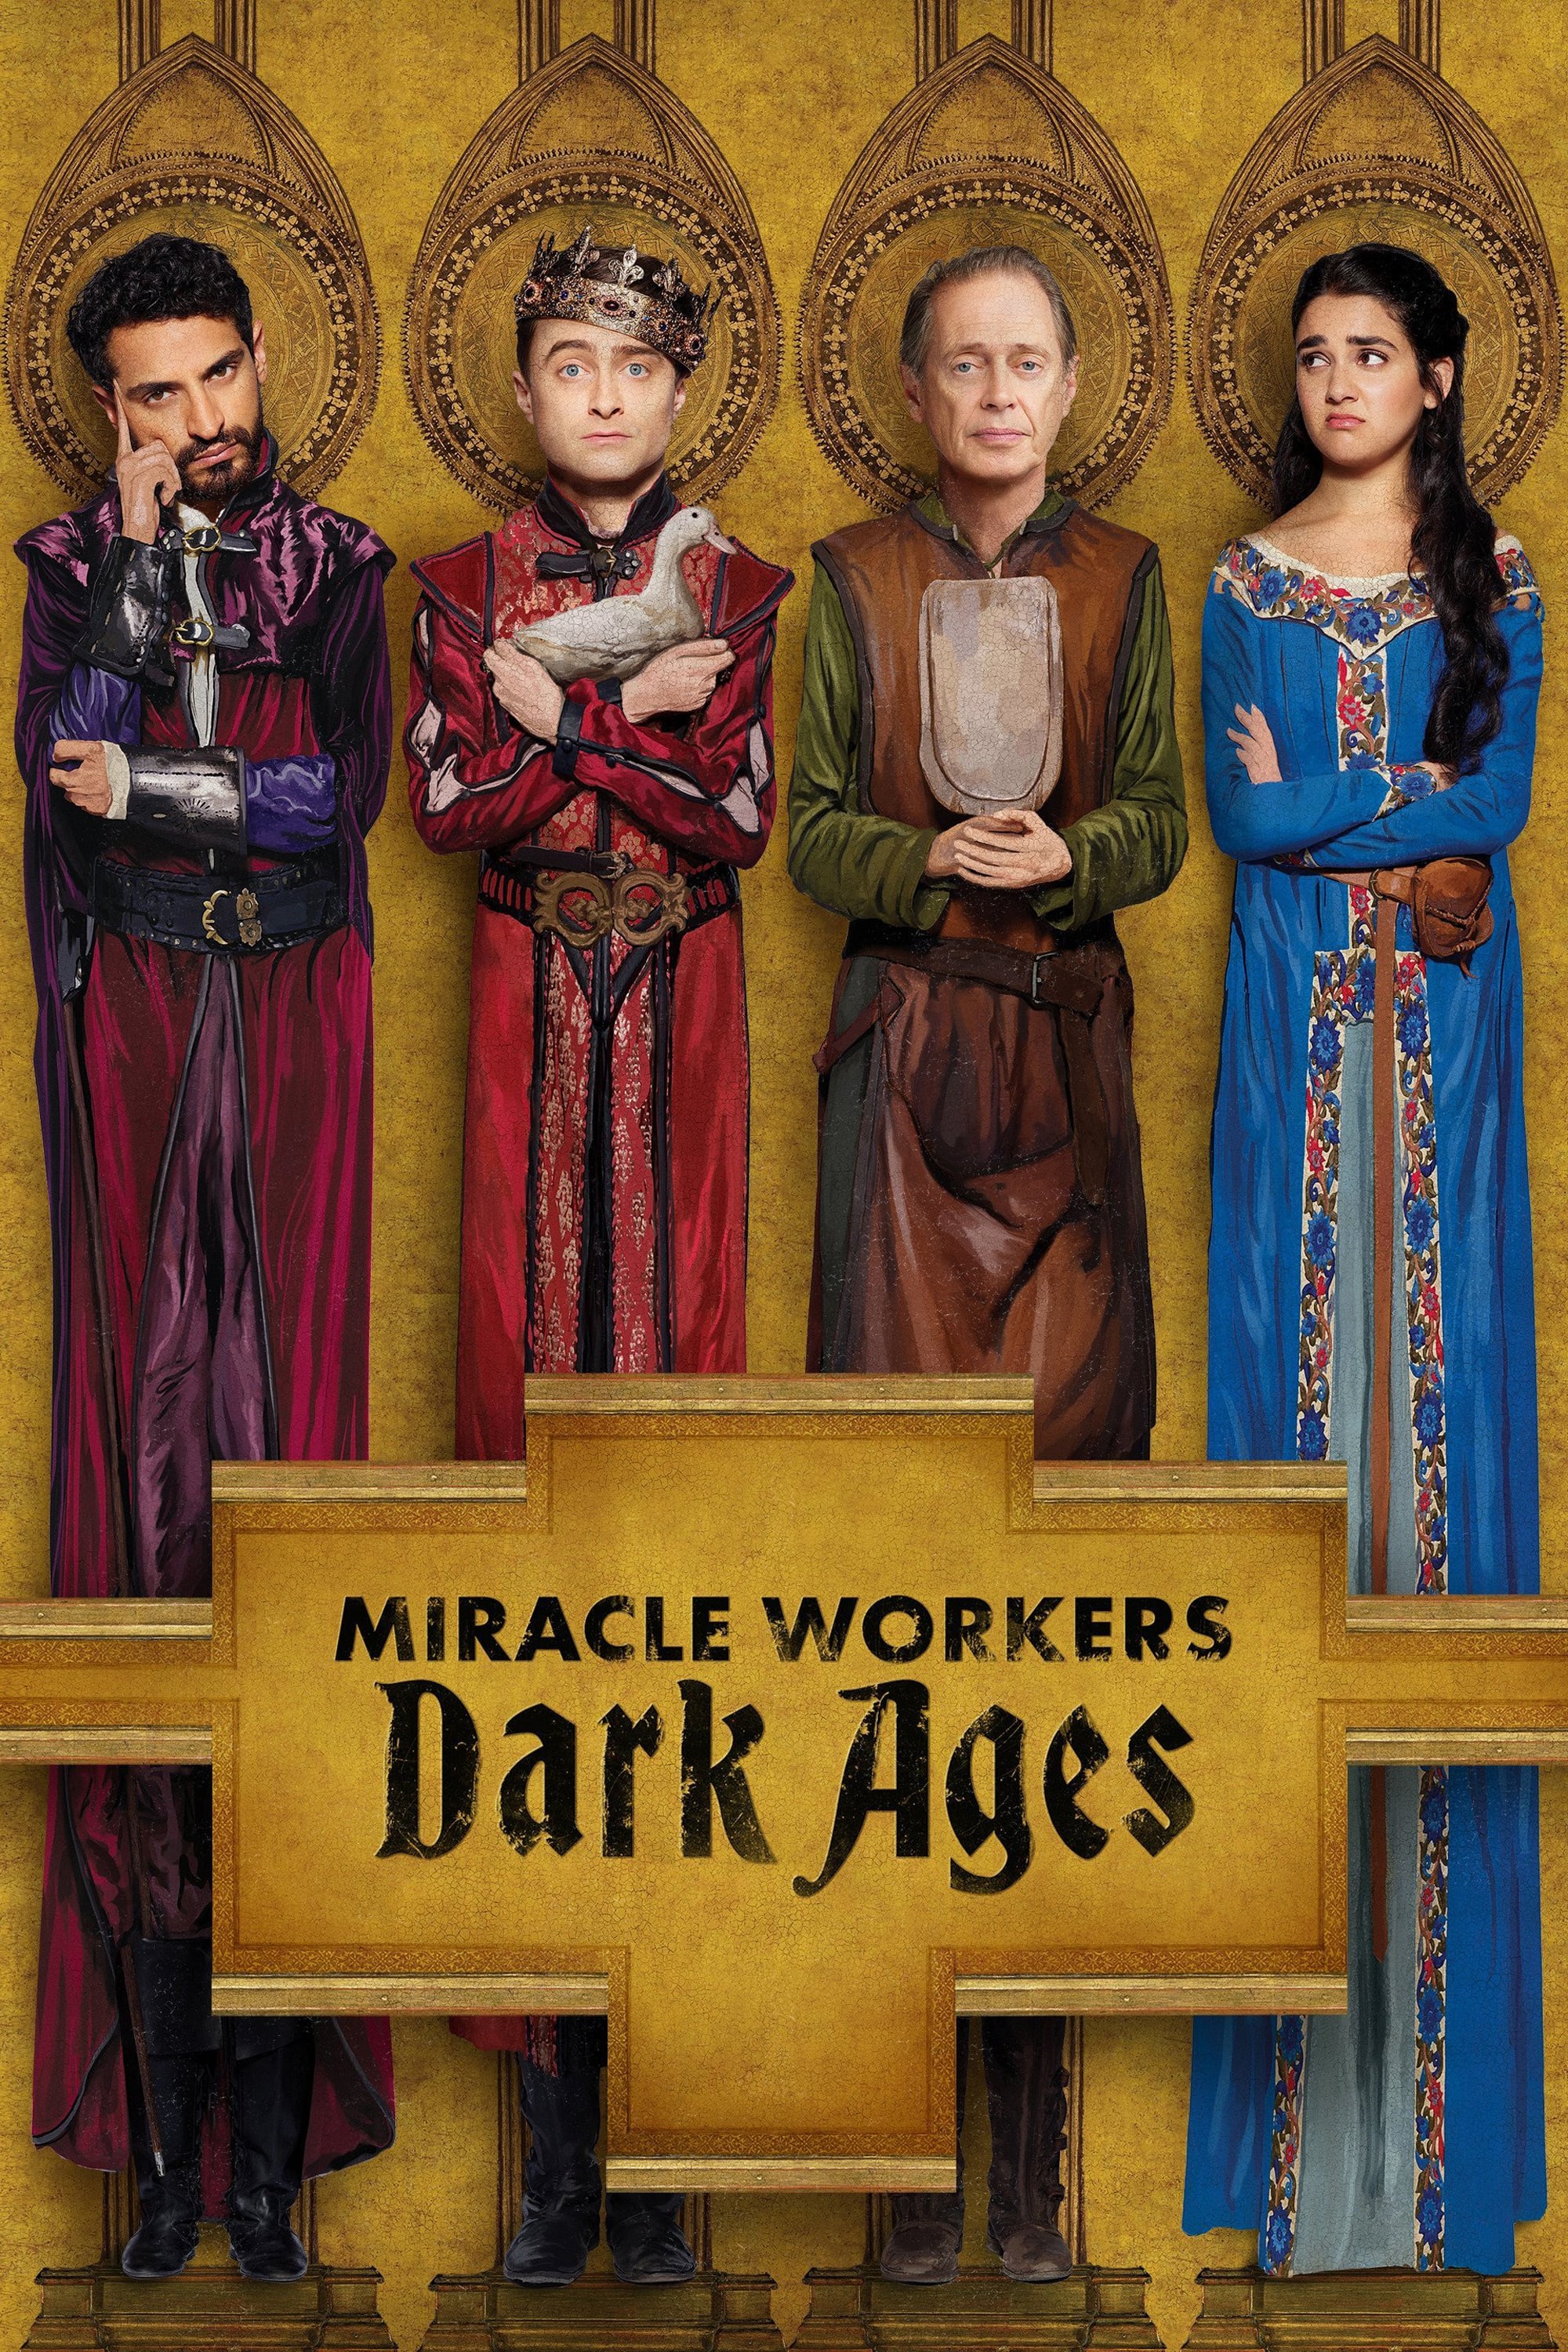 Miracle Workers french stream hd